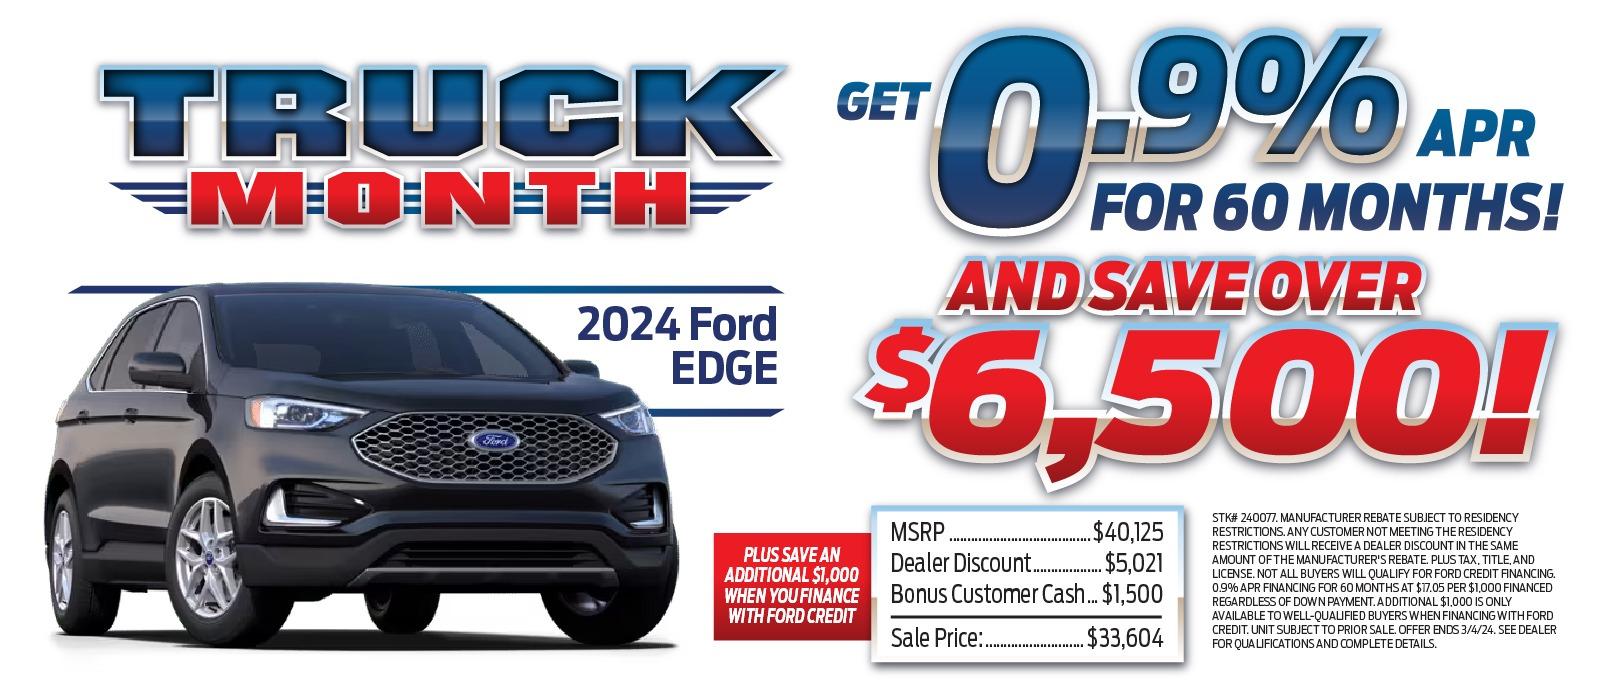 2024 Ford Edge
Get
0.9% APR
For 60 Months!
And
Save Over $6,500